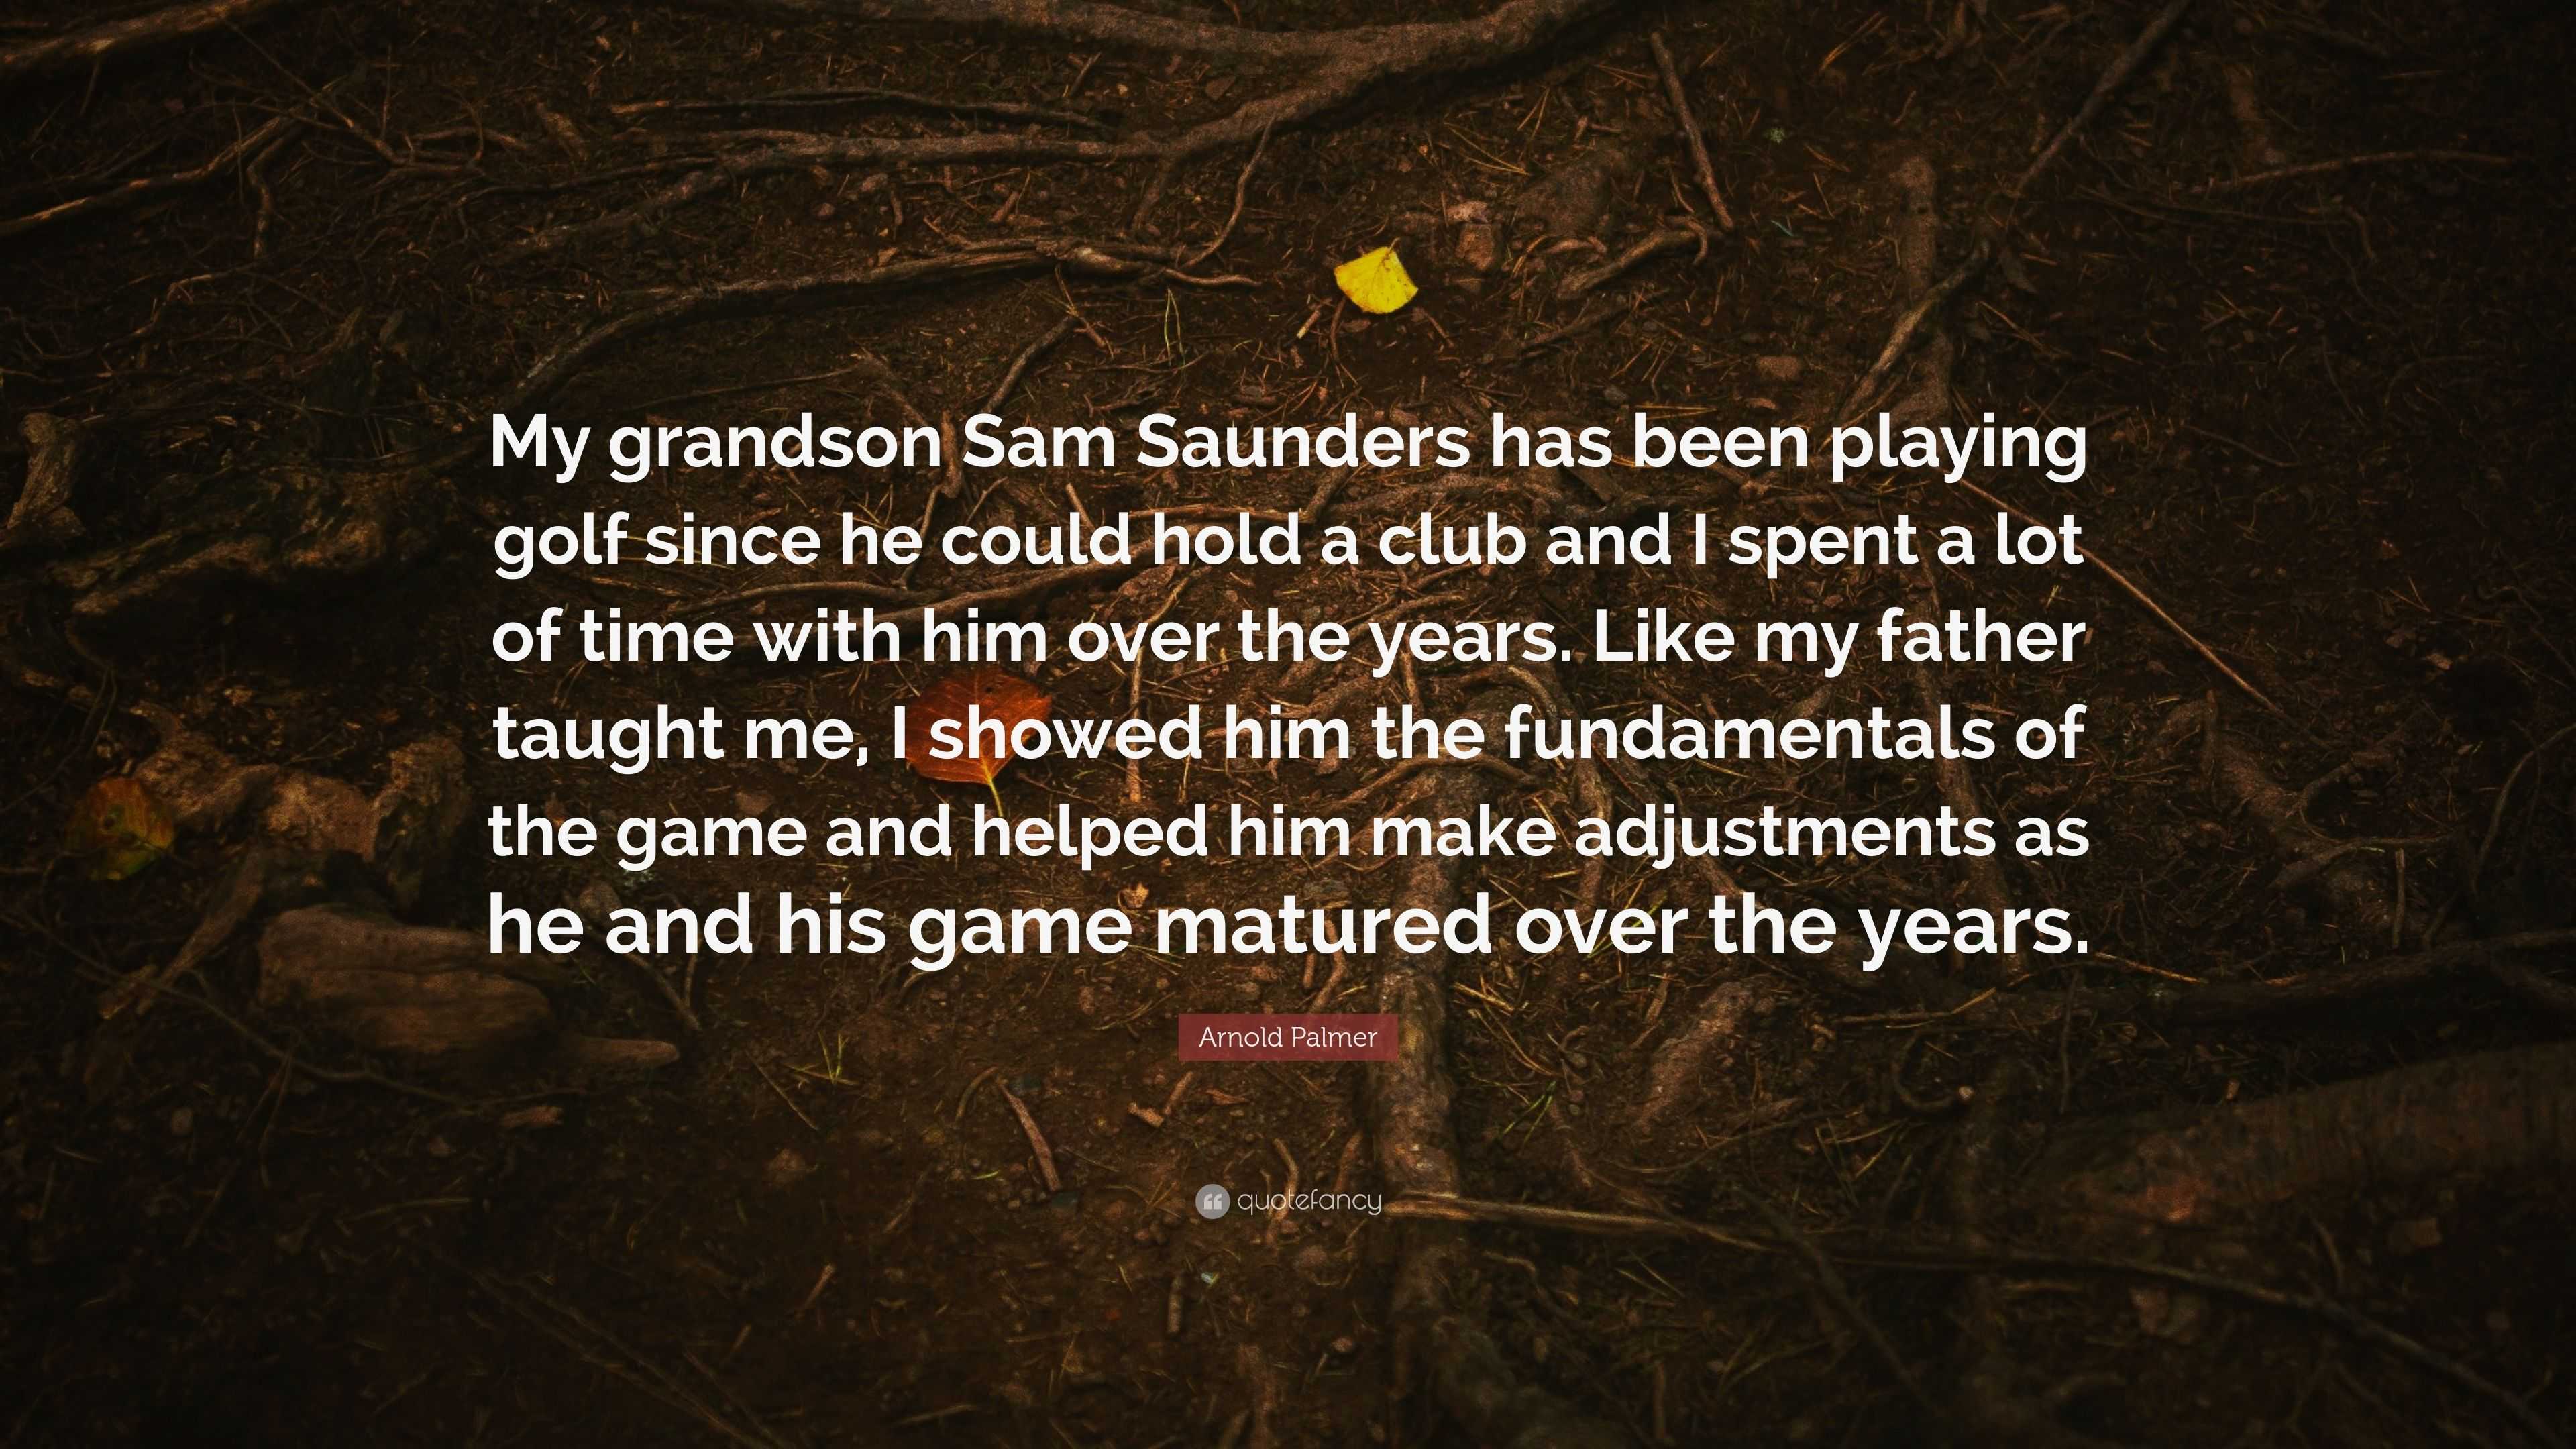 Arnold Palmer Quote: “My grandson Sam Saunders has been playing golf since  he could hold a club and I spent a lot of time with him over the ye...”